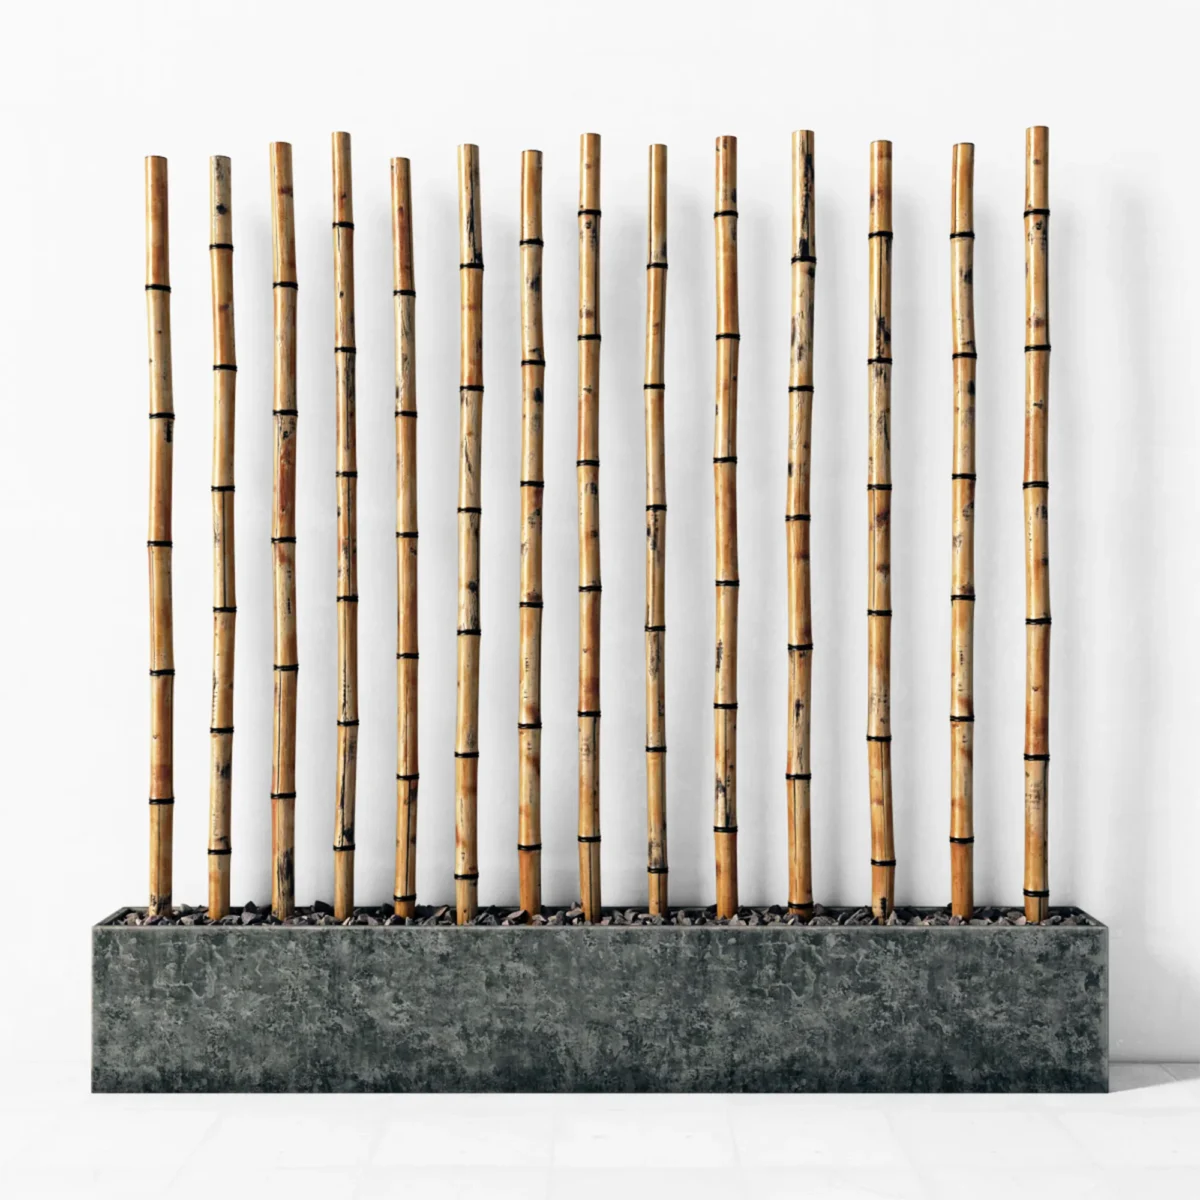 Bamboo decor fundament concrete 3D model download on cg.market 3ds max,V-Ray